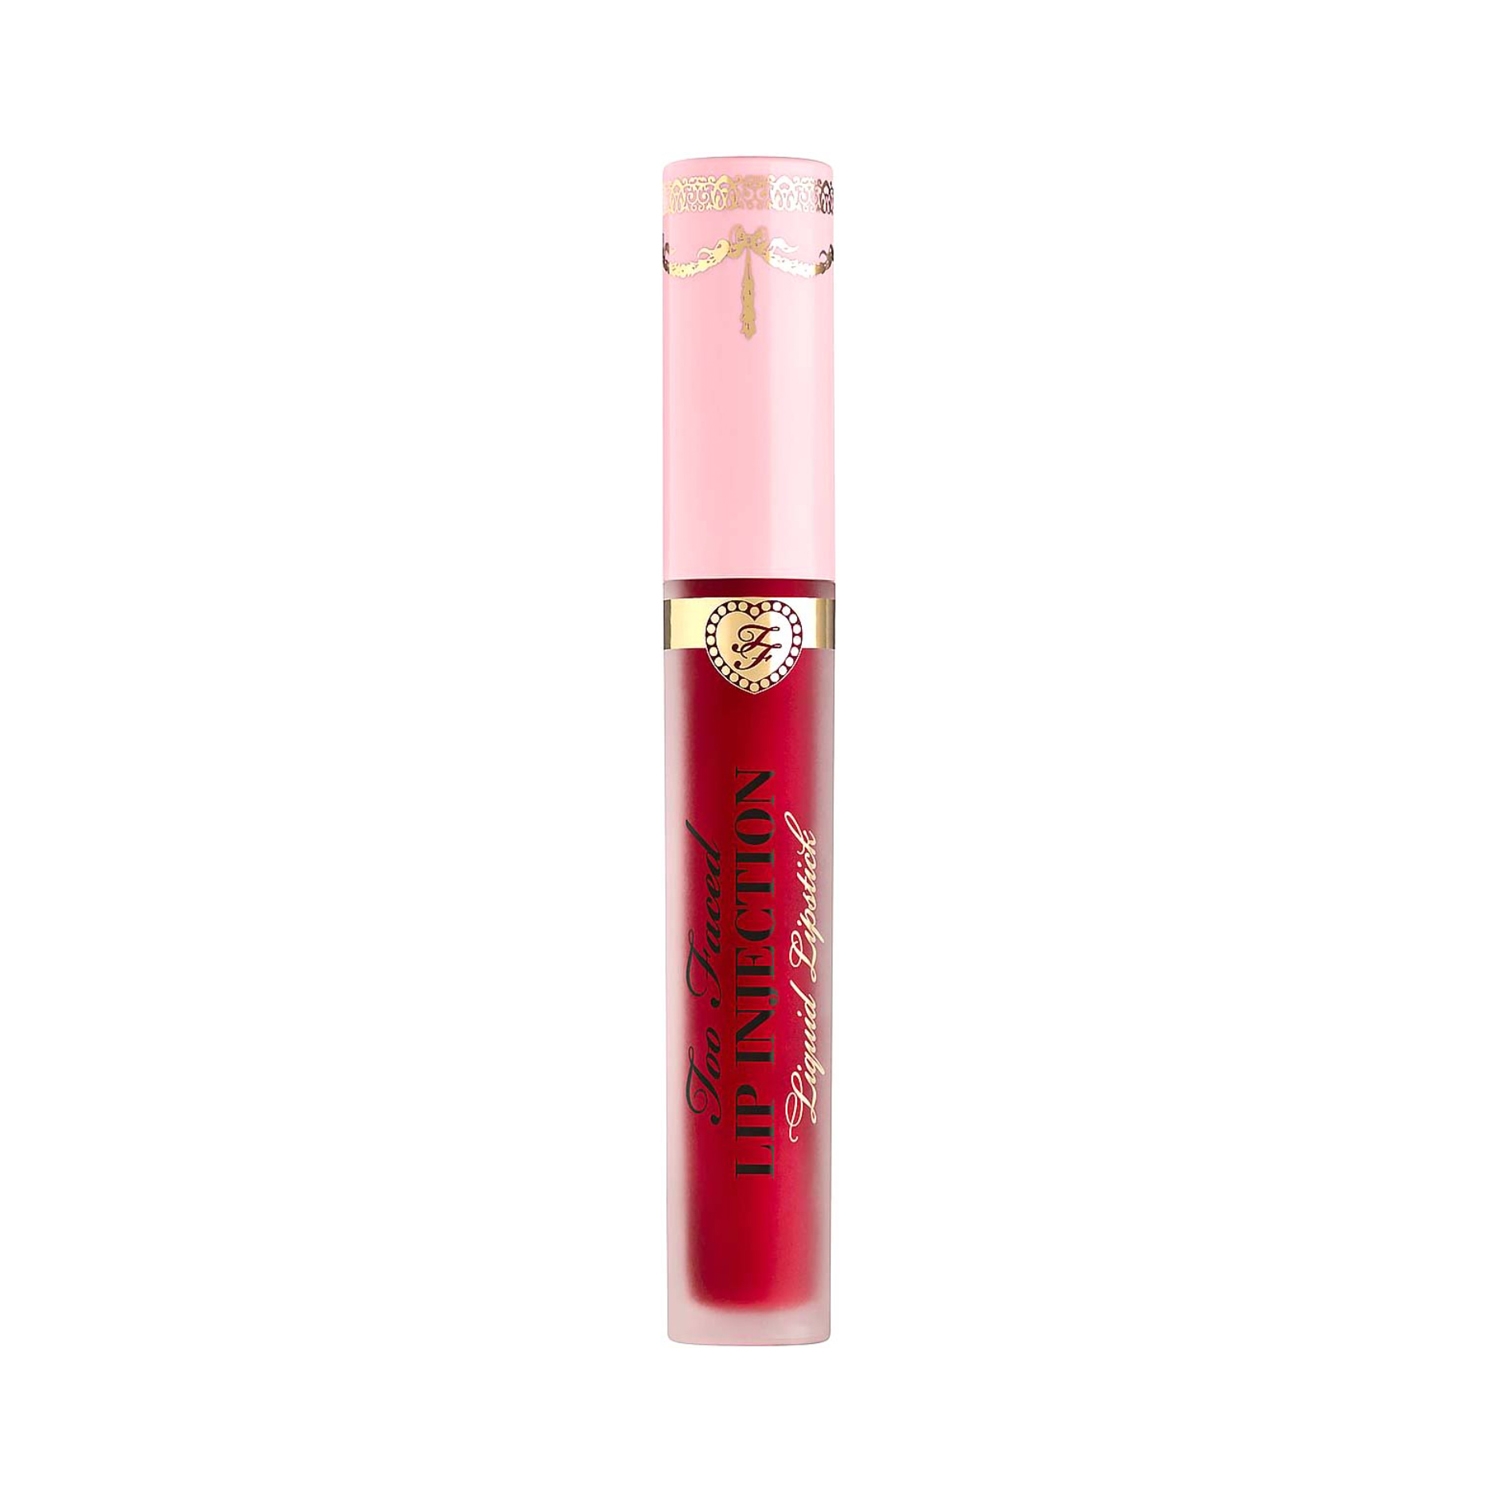 Too Faced | Too Faced Lip Injection Liquid Lipstick - Infatuated (3ml)